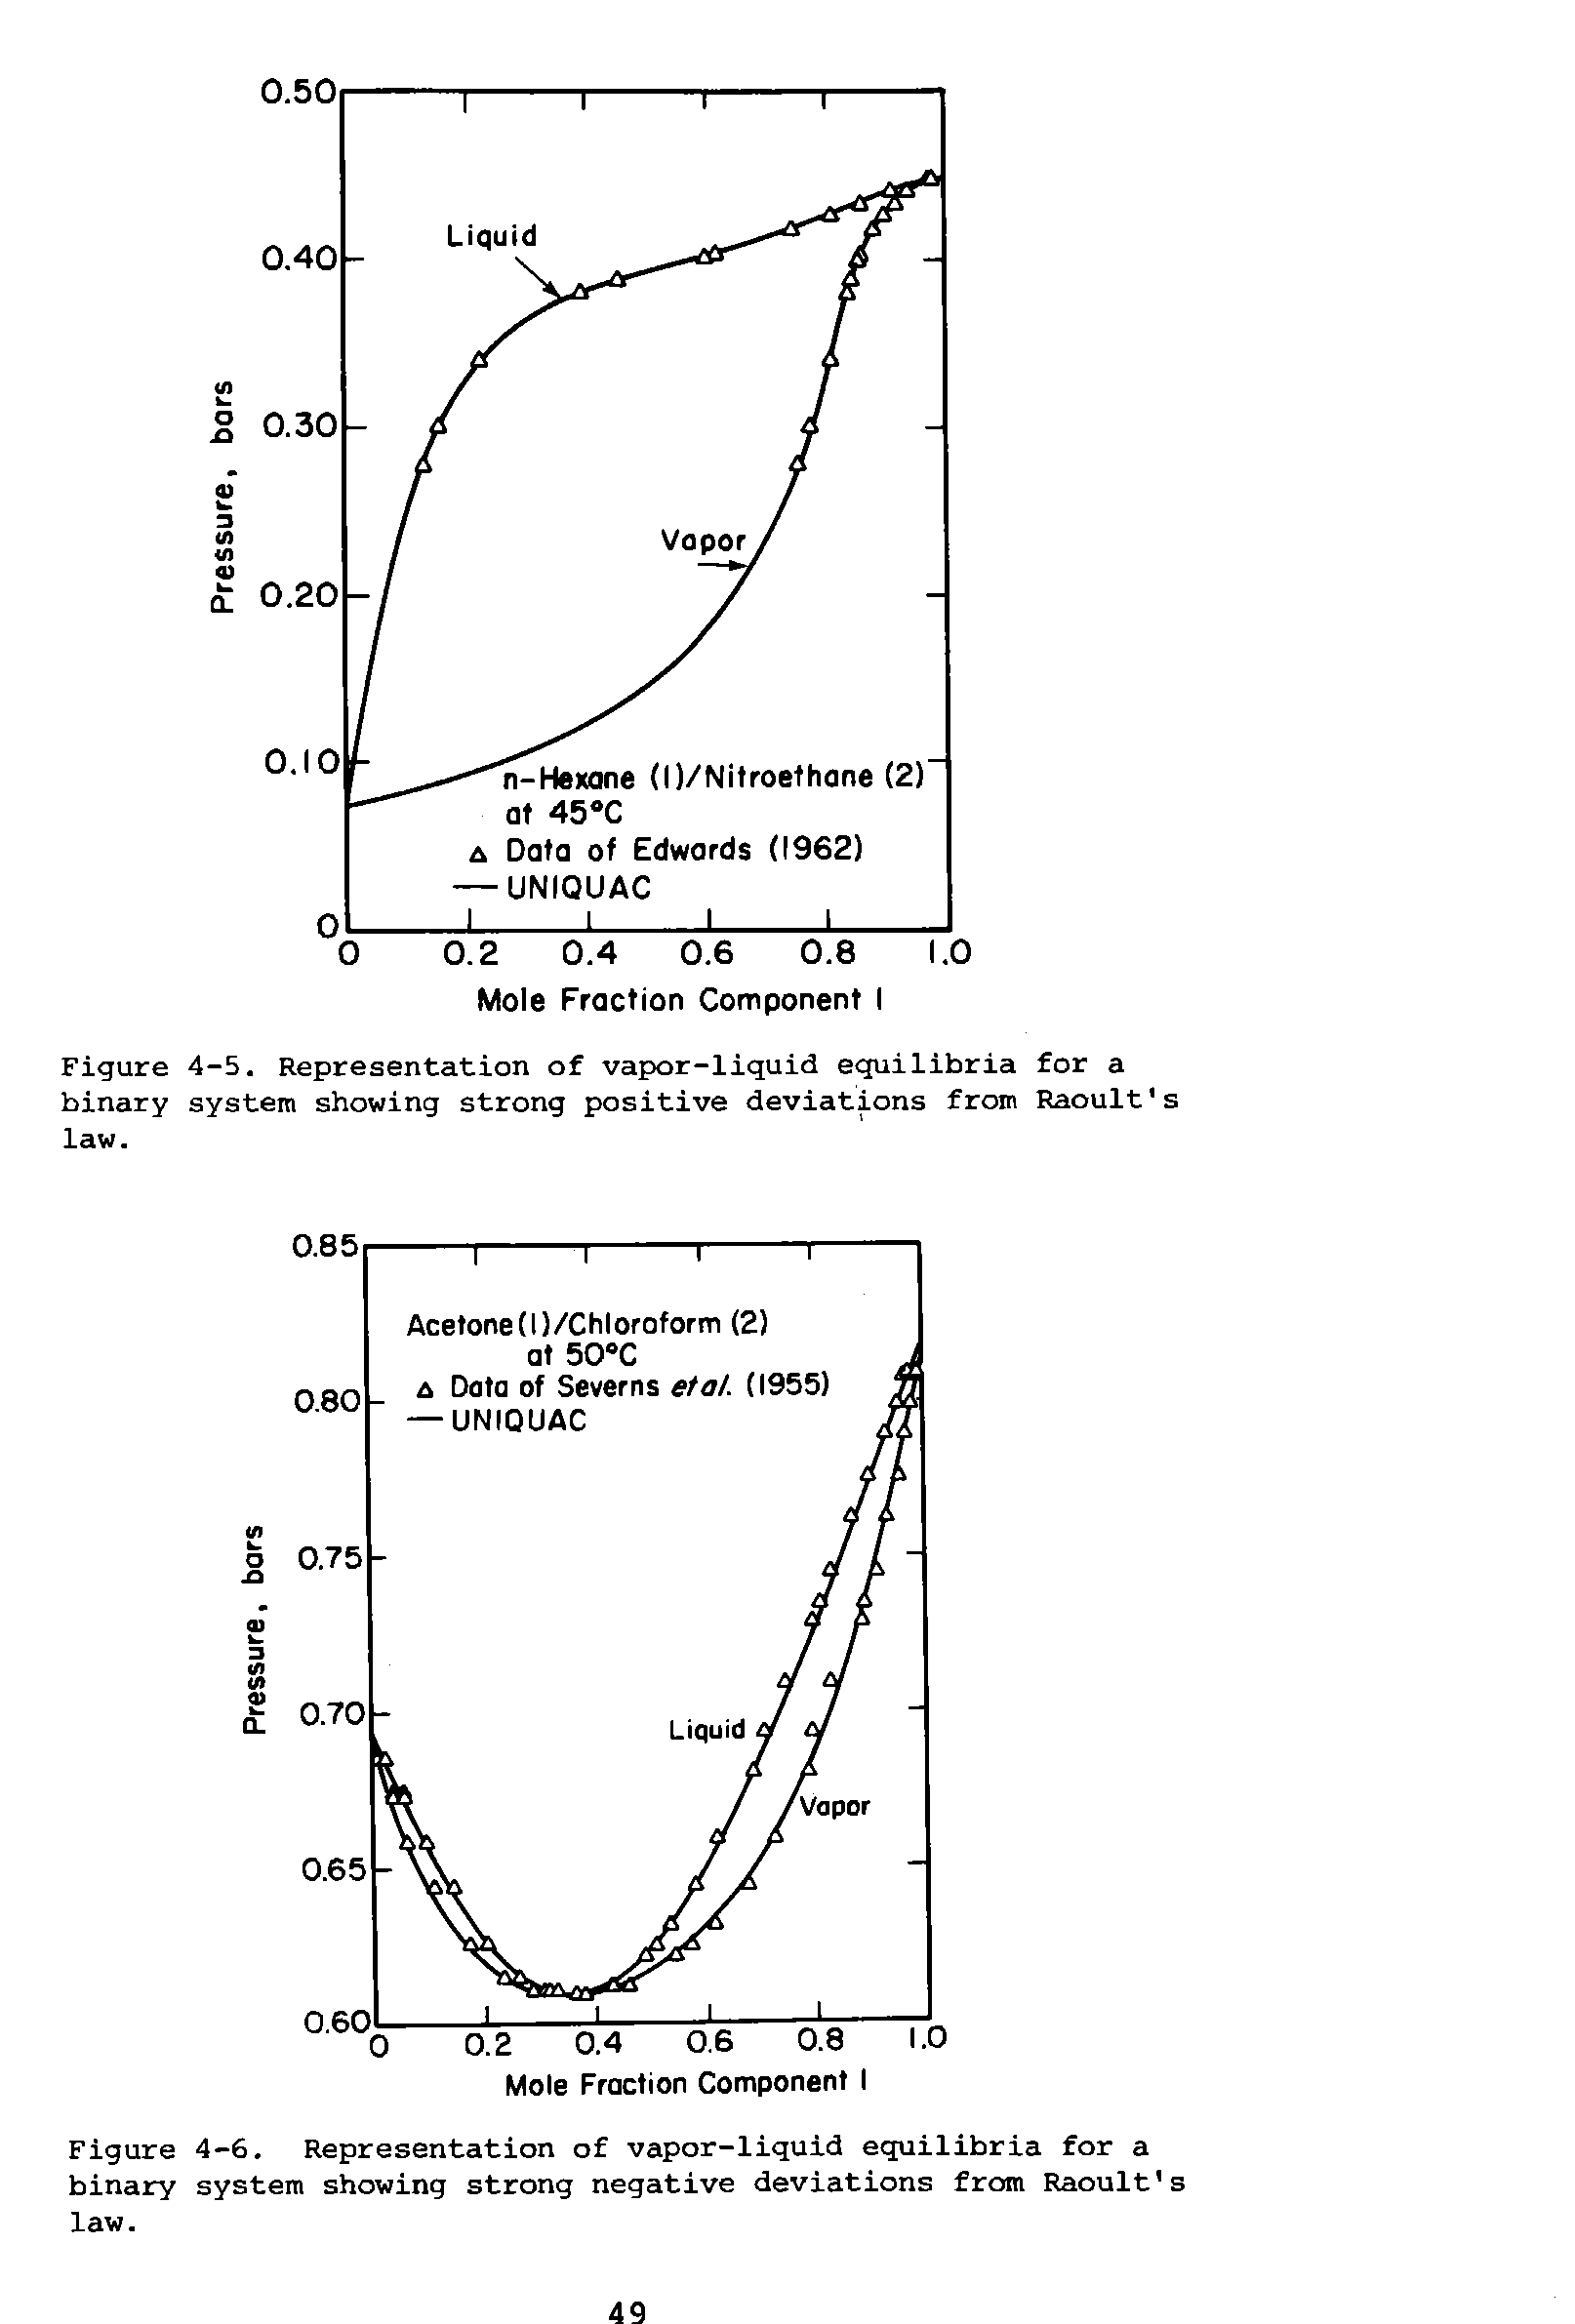 Figure 4-6. Representation of vapor-liquid equilibria for a binary system showing strong negative deviations from Raoult s law.